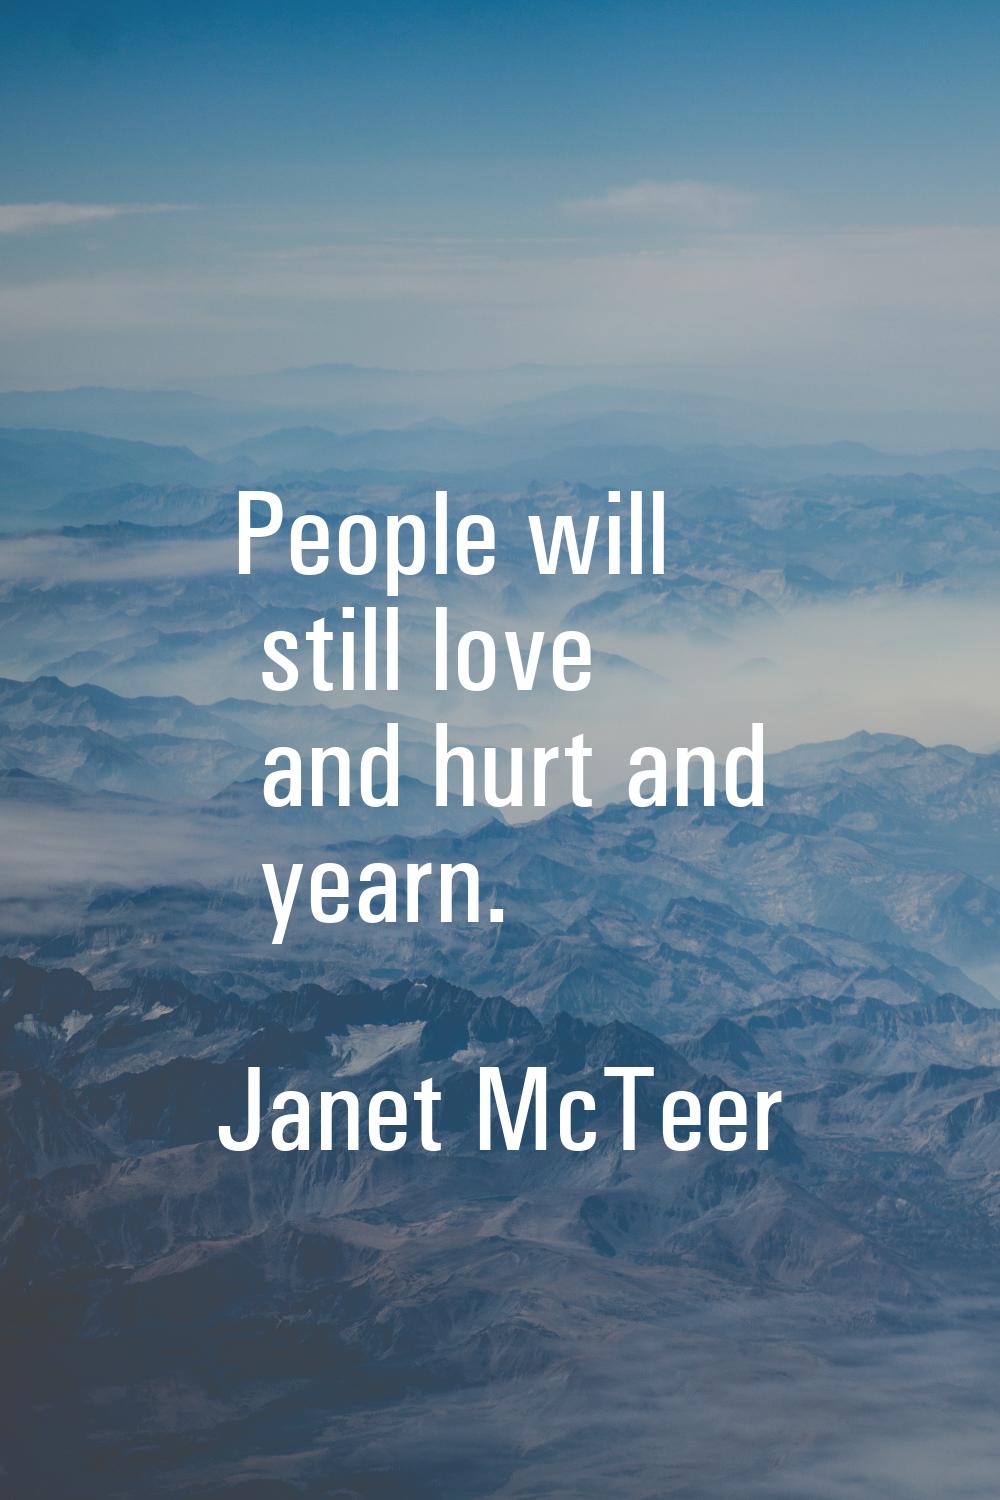 People will still love and hurt and yearn.